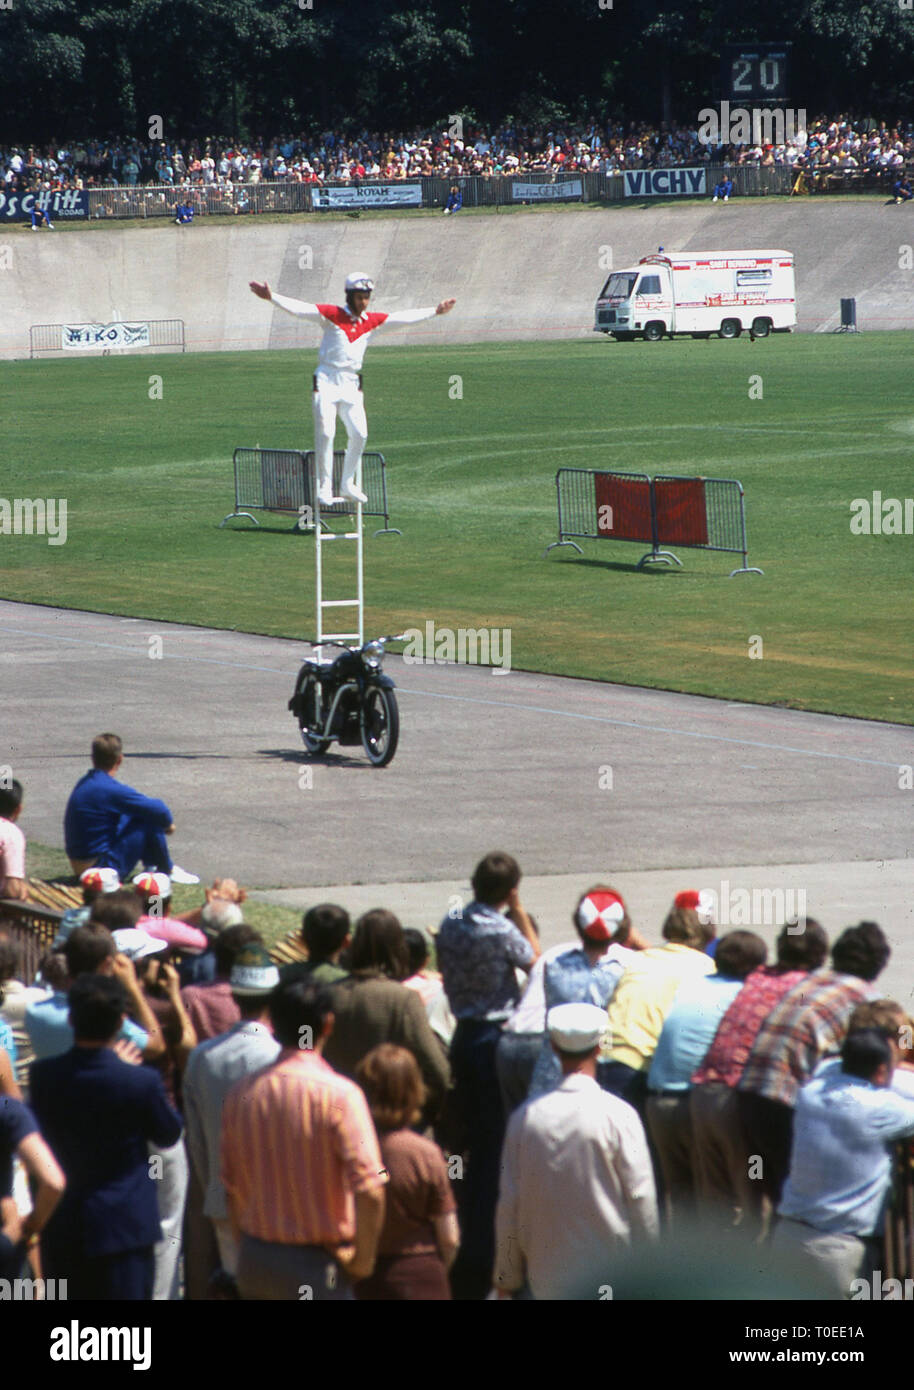 1974, tricks motorcyclist standing on a ladder riding a motorcycle entertaining the spectators at the finish of the Tour de France cycle race on the track at the Velodrome de Vincennes, Paris, France. This was the last year the Tour finished at the velodrome as the following year it moved to the Champs-Elysees. Stock Photo